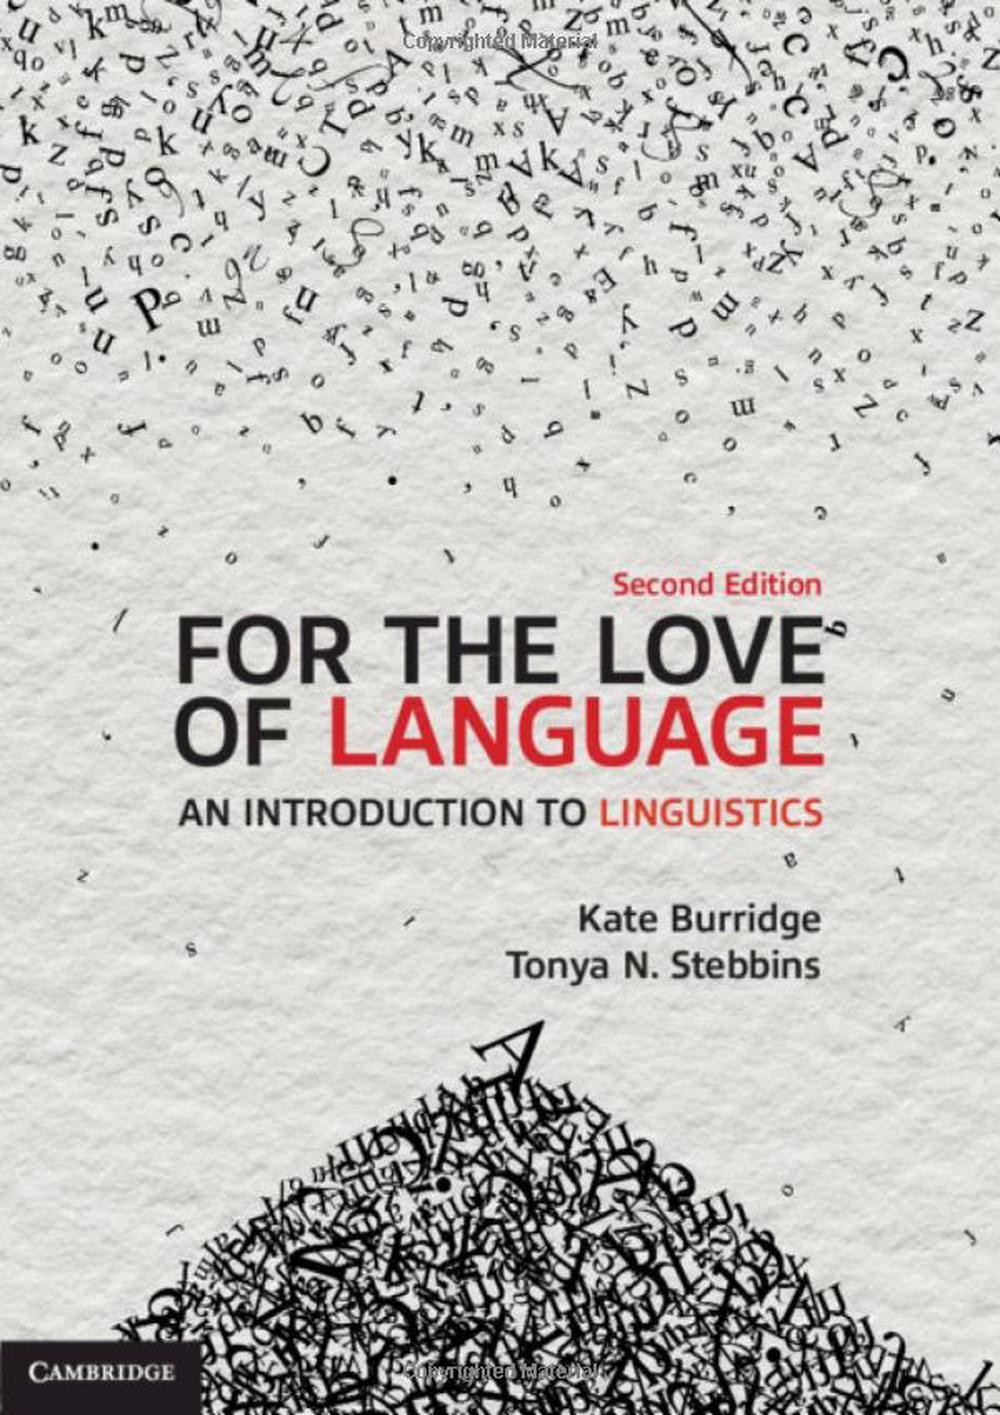 For the Love of Language: An Introduction to Linguistics